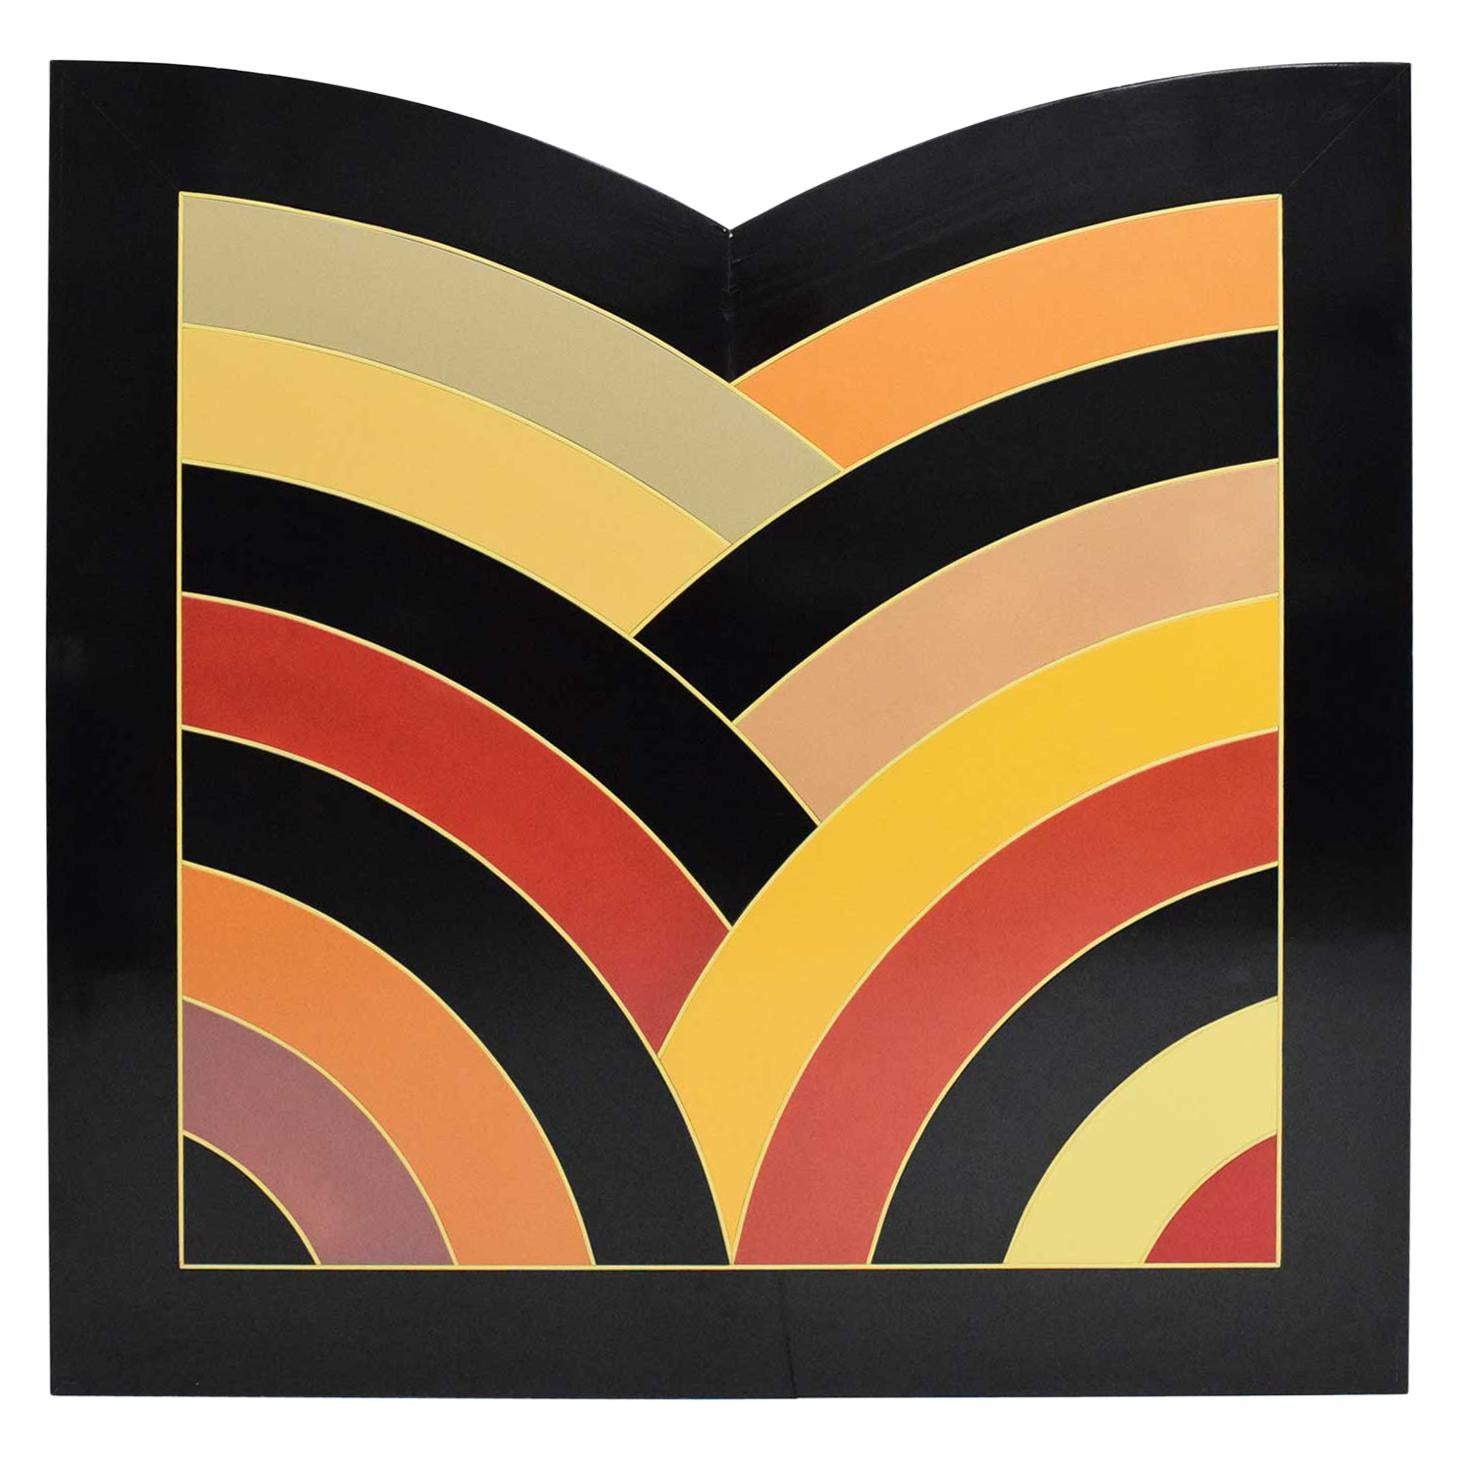 Large Painting on Board in Style of Frank Stella's Award Winning MOMA Logo